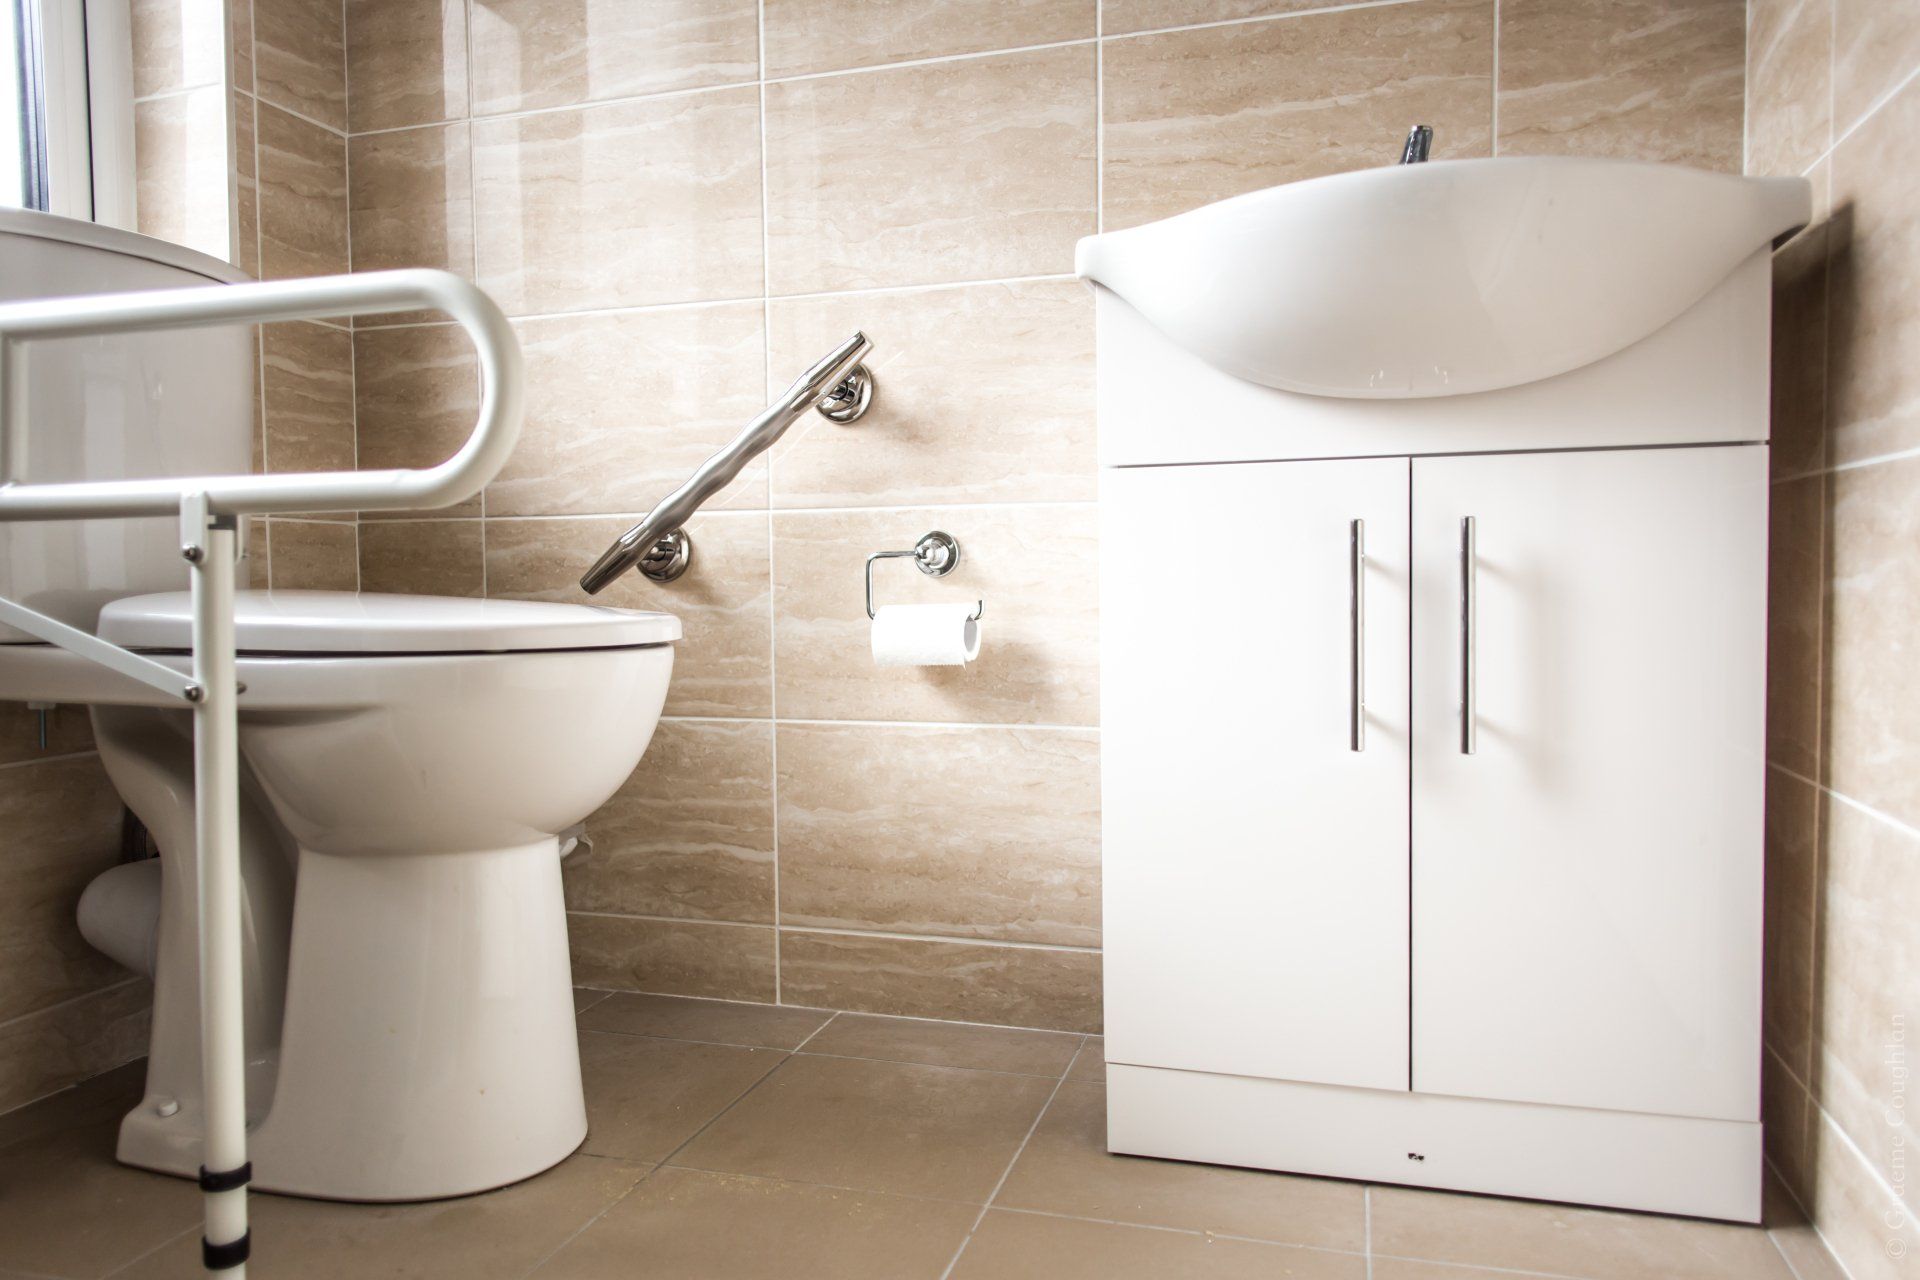 Bathroom Design For People with Disabilities — Impact Bathrooms in Bateau Bay, NSW